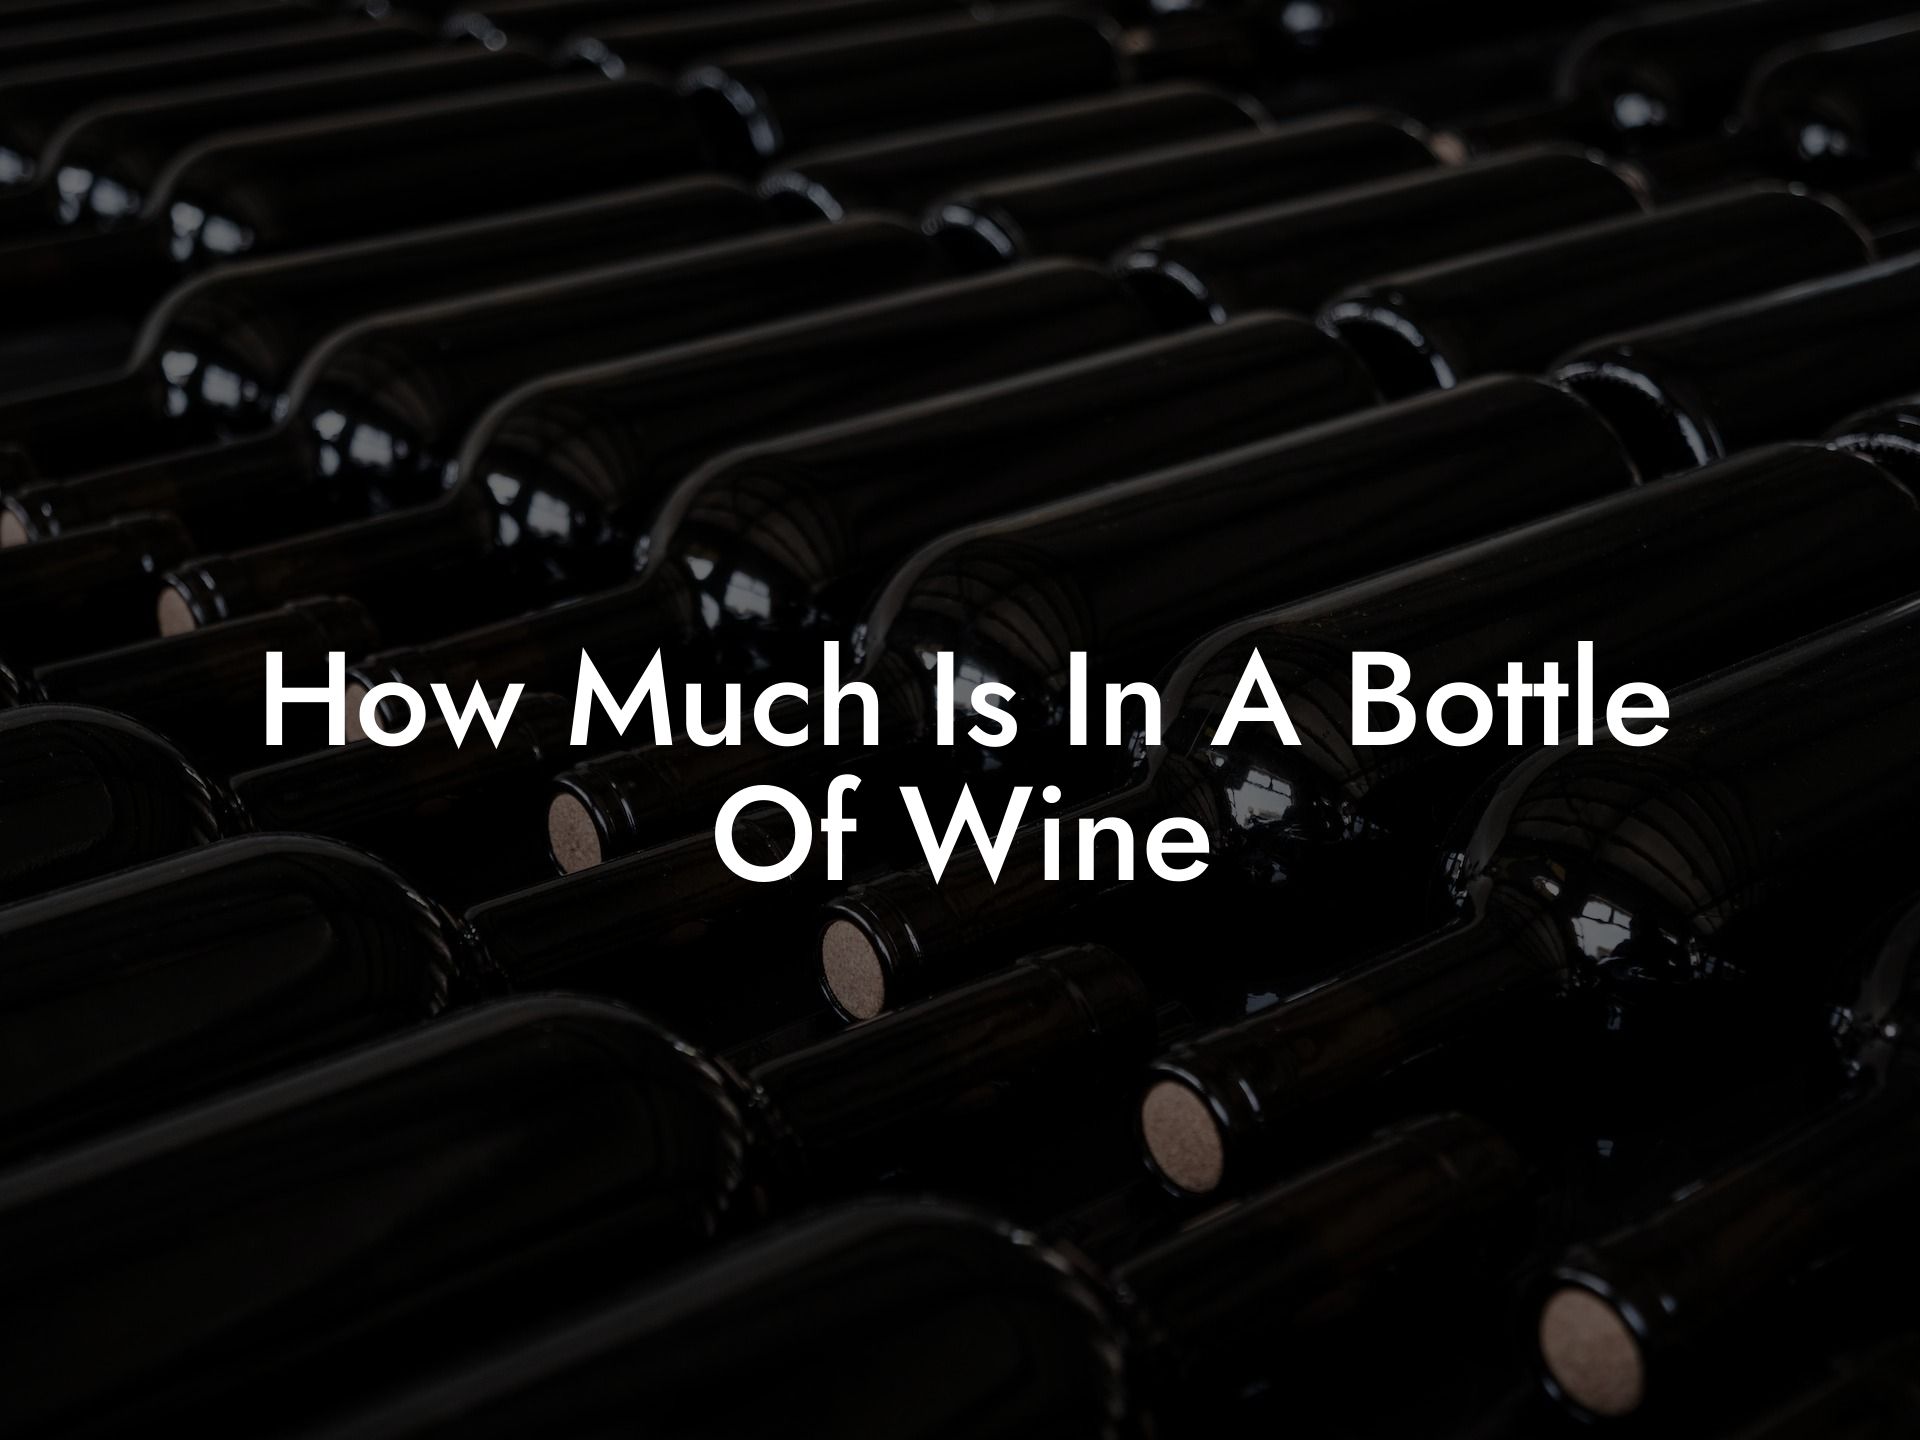 How Much Is In A Bottle Of Wine